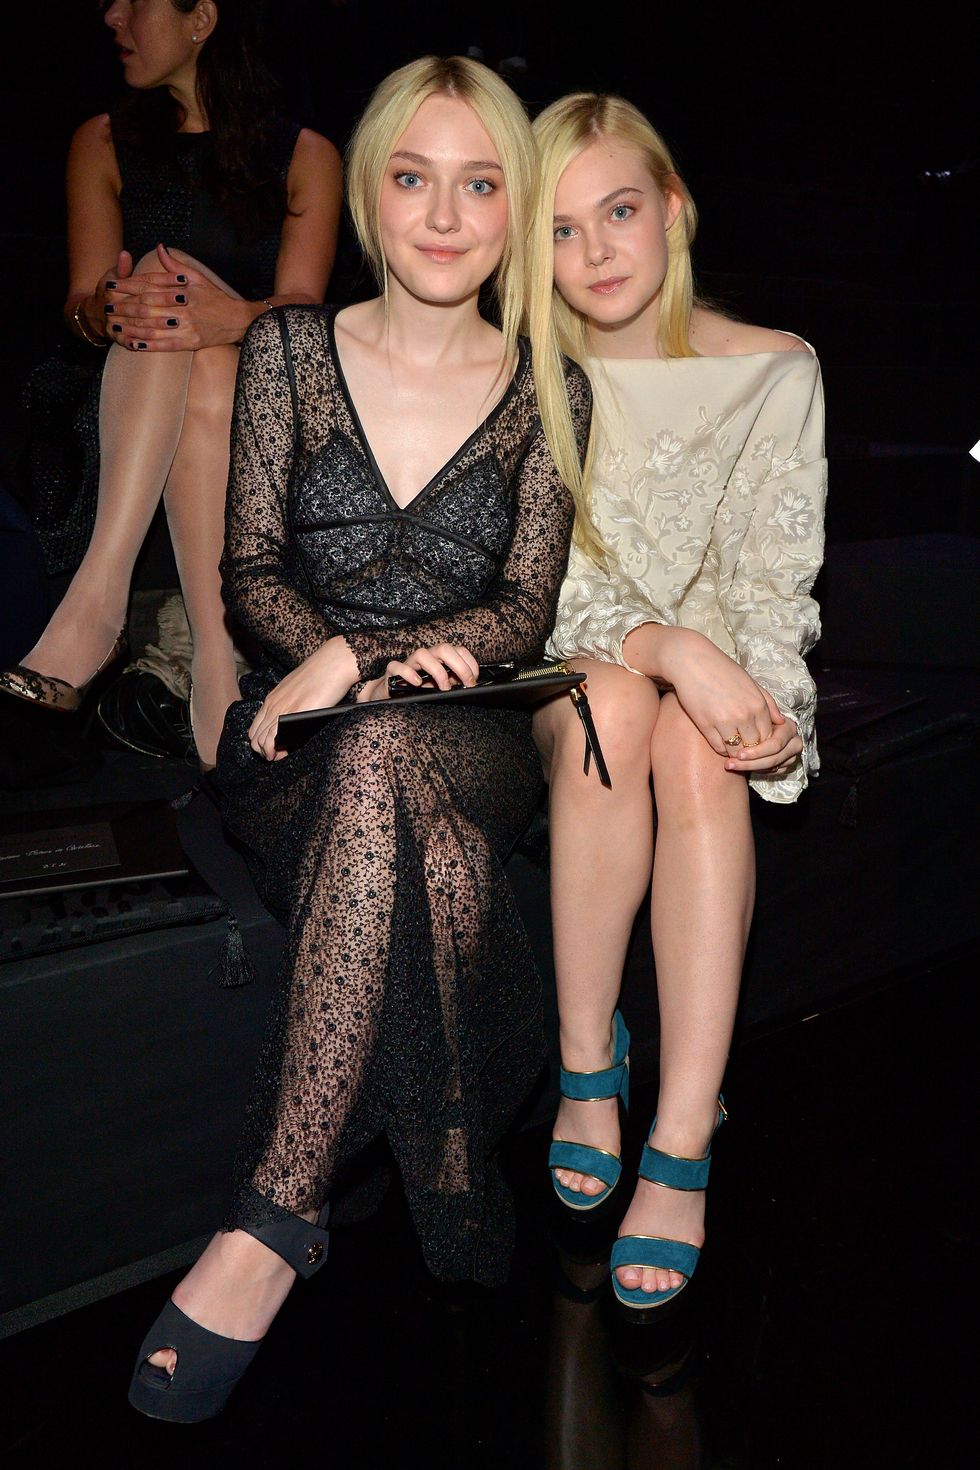 PARIS, FRANCE - OCTOBER 02: (L-R) Dakota Fanning and Elle Fanning attend the Louis Vuitton show as part of the Paris Fashion Week Womenswear  Spring/Summer 2014 on October 2, 2013 in Paris, France.  (Photo by Dominique Charriau/WireImage)